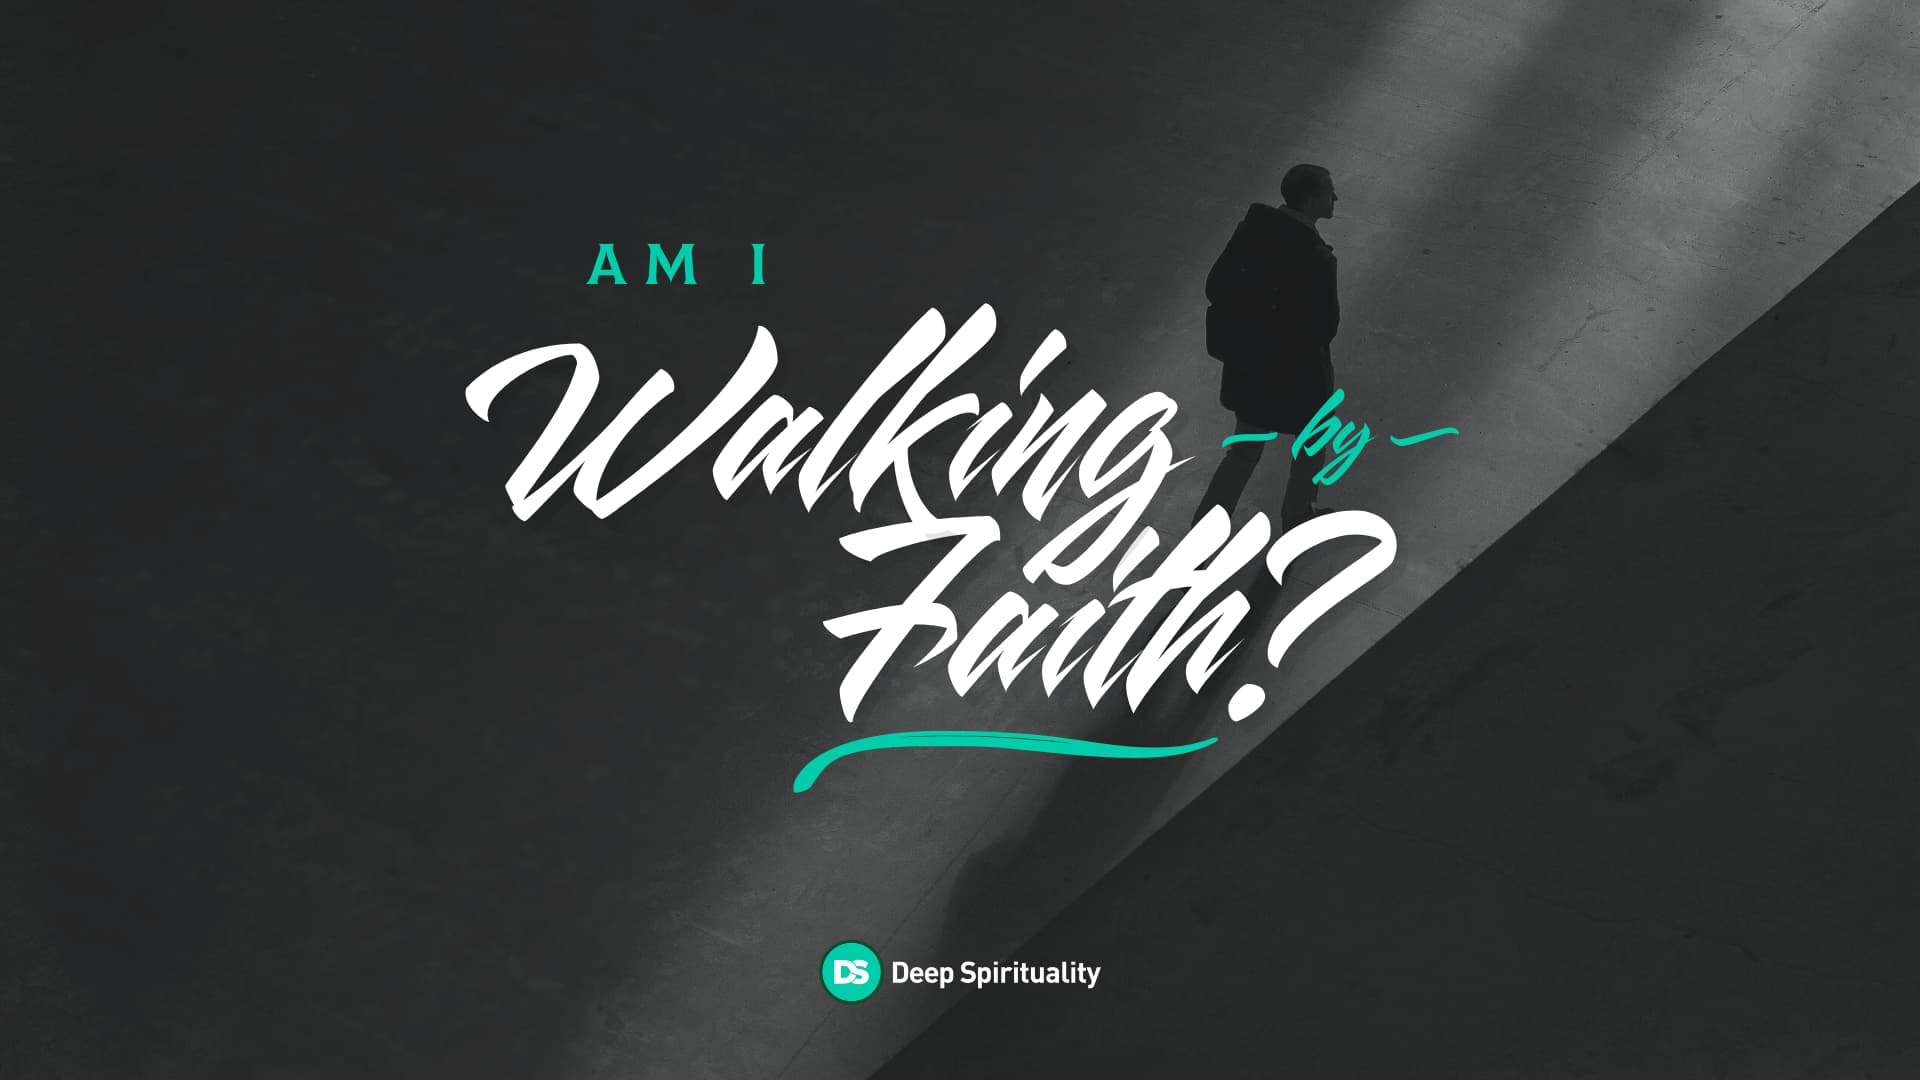 How Do I Know if I’m Walking by Faith? 3